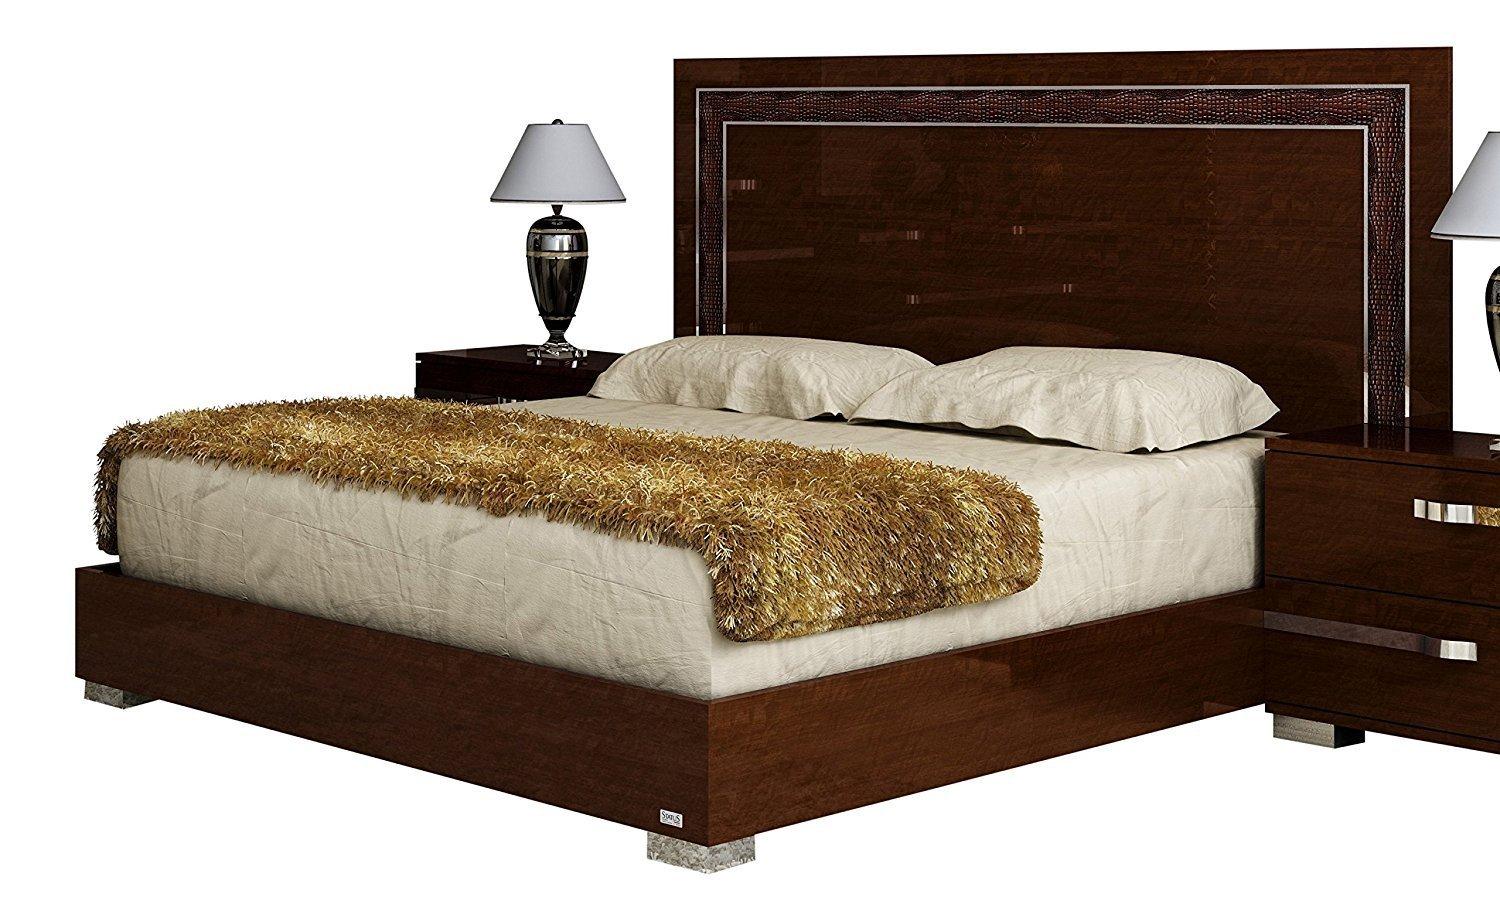 

    
At Home USA Volare Walnut High Gloss Lacquer King Bed Contemporary Made in Italy
